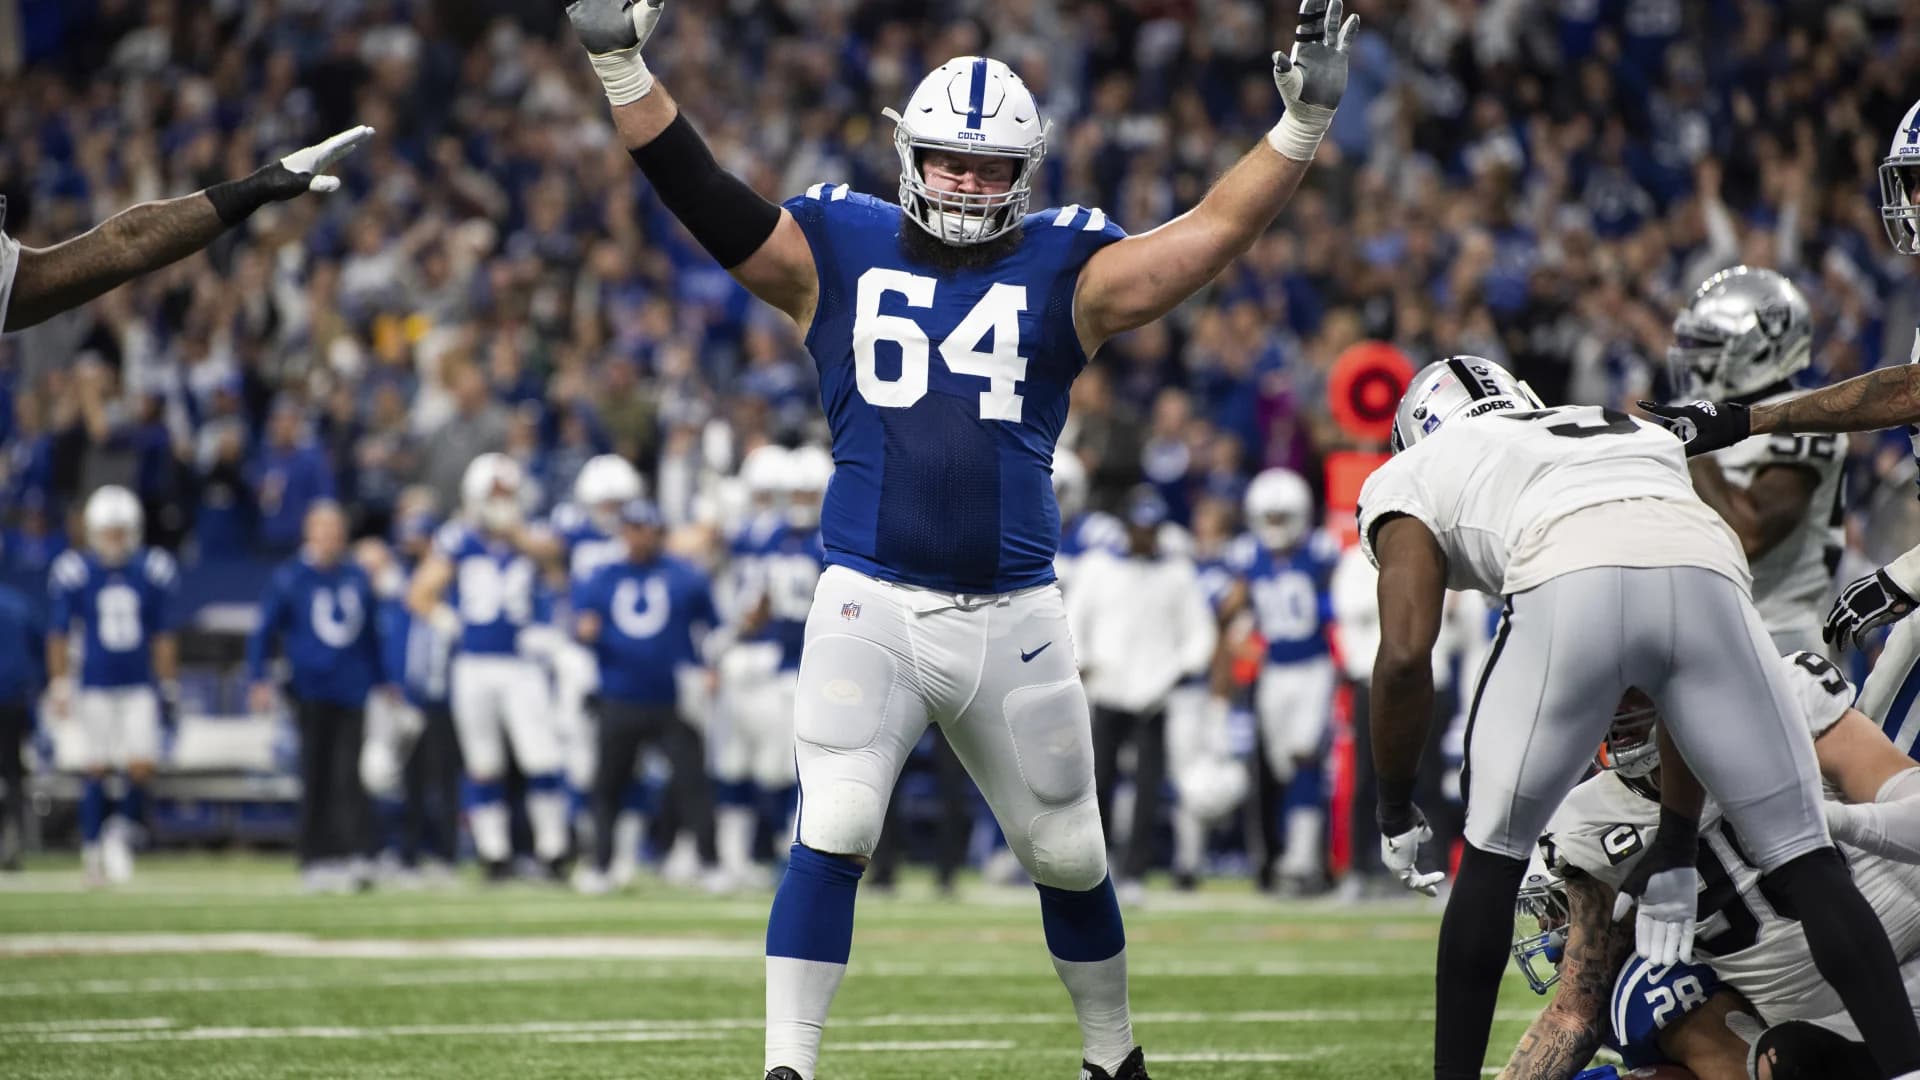 Giants agree to terms with O-linemen Glowinski and Feliciano